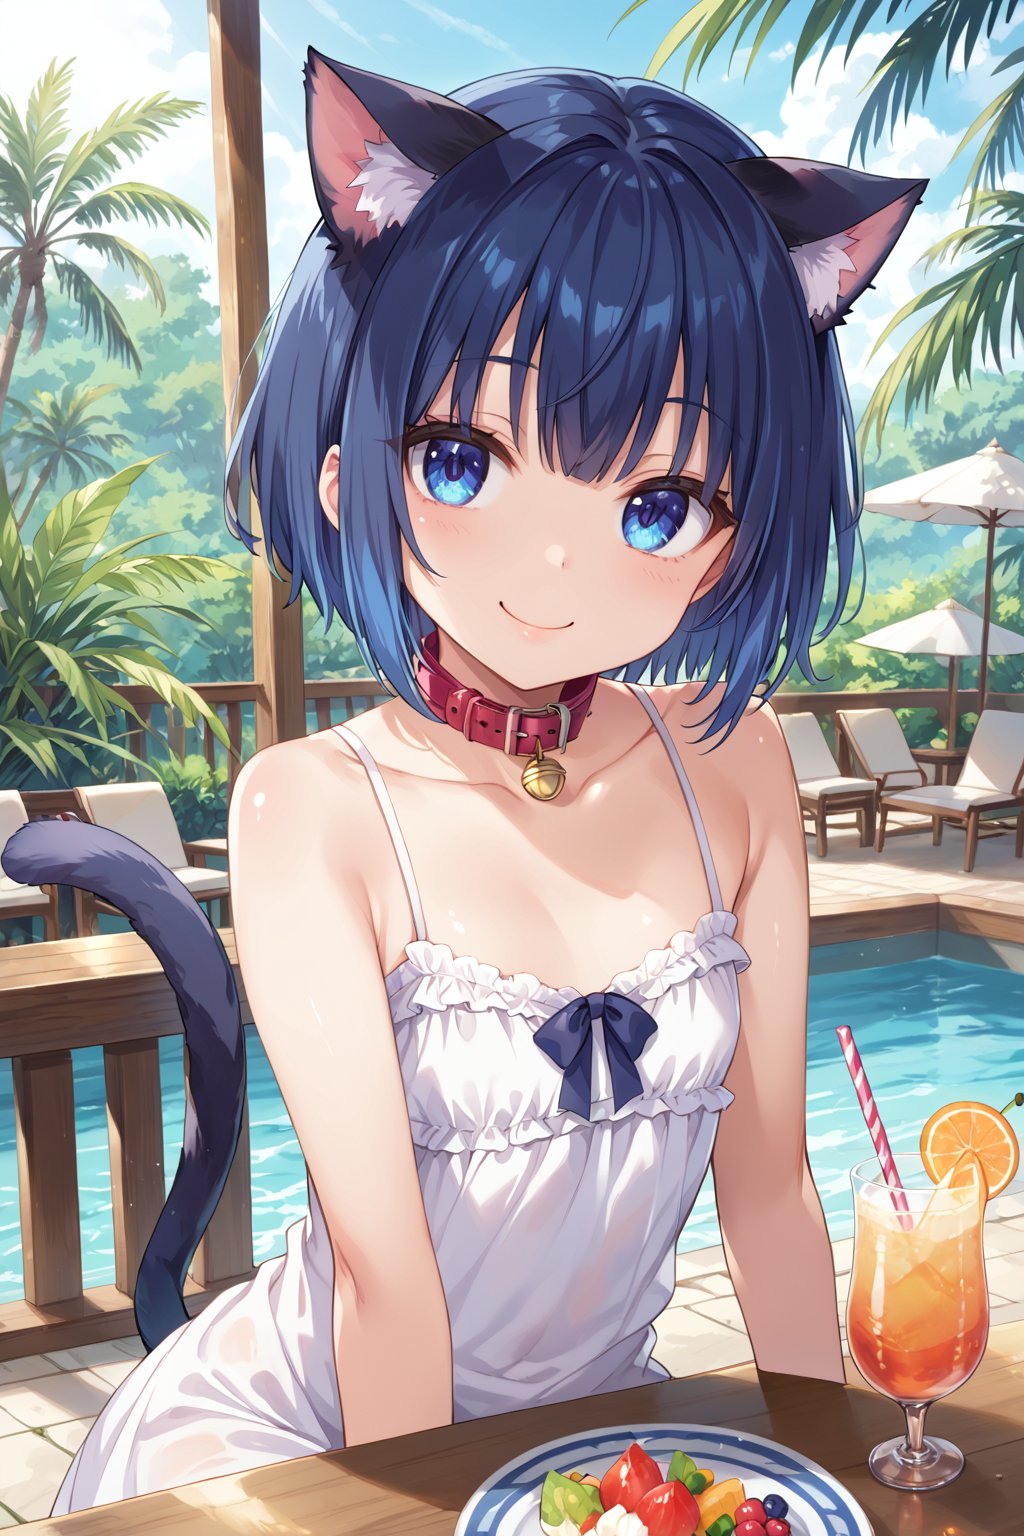 masterpiece, best quality, ultra-detailed, score_9, score_8_up, score_7_up, 
focus on face,

(one girl), 

shiny dark blue hair, shiny dark blue cat ears ,  short bob hair, dark blue medium hair, shiny dark blue hairs ,blue eyes,

, kannakamui, emo, Claudia, , (((flat chest))), No public hair, extremely pretty face, beautiful face, ultra-detaild face, cute and round face, ultra-detailed eyes, round eyes, rubby eyes, droopy eyes , 

beautiful and delicate and ultra-detailed finger, 

(((very young Petite girl))), skinny,

((nekomimi)),Cat ears the same color as her hair, cat collar,

summer, in the lakeside, outdoor, resort,
 in  the open cafe, sit at a table, one tropical juice, two straws,

white Summer-like camisole dress , colored lace line ribbon, lots of lace, shyness, smile, happy,

cat tail,
